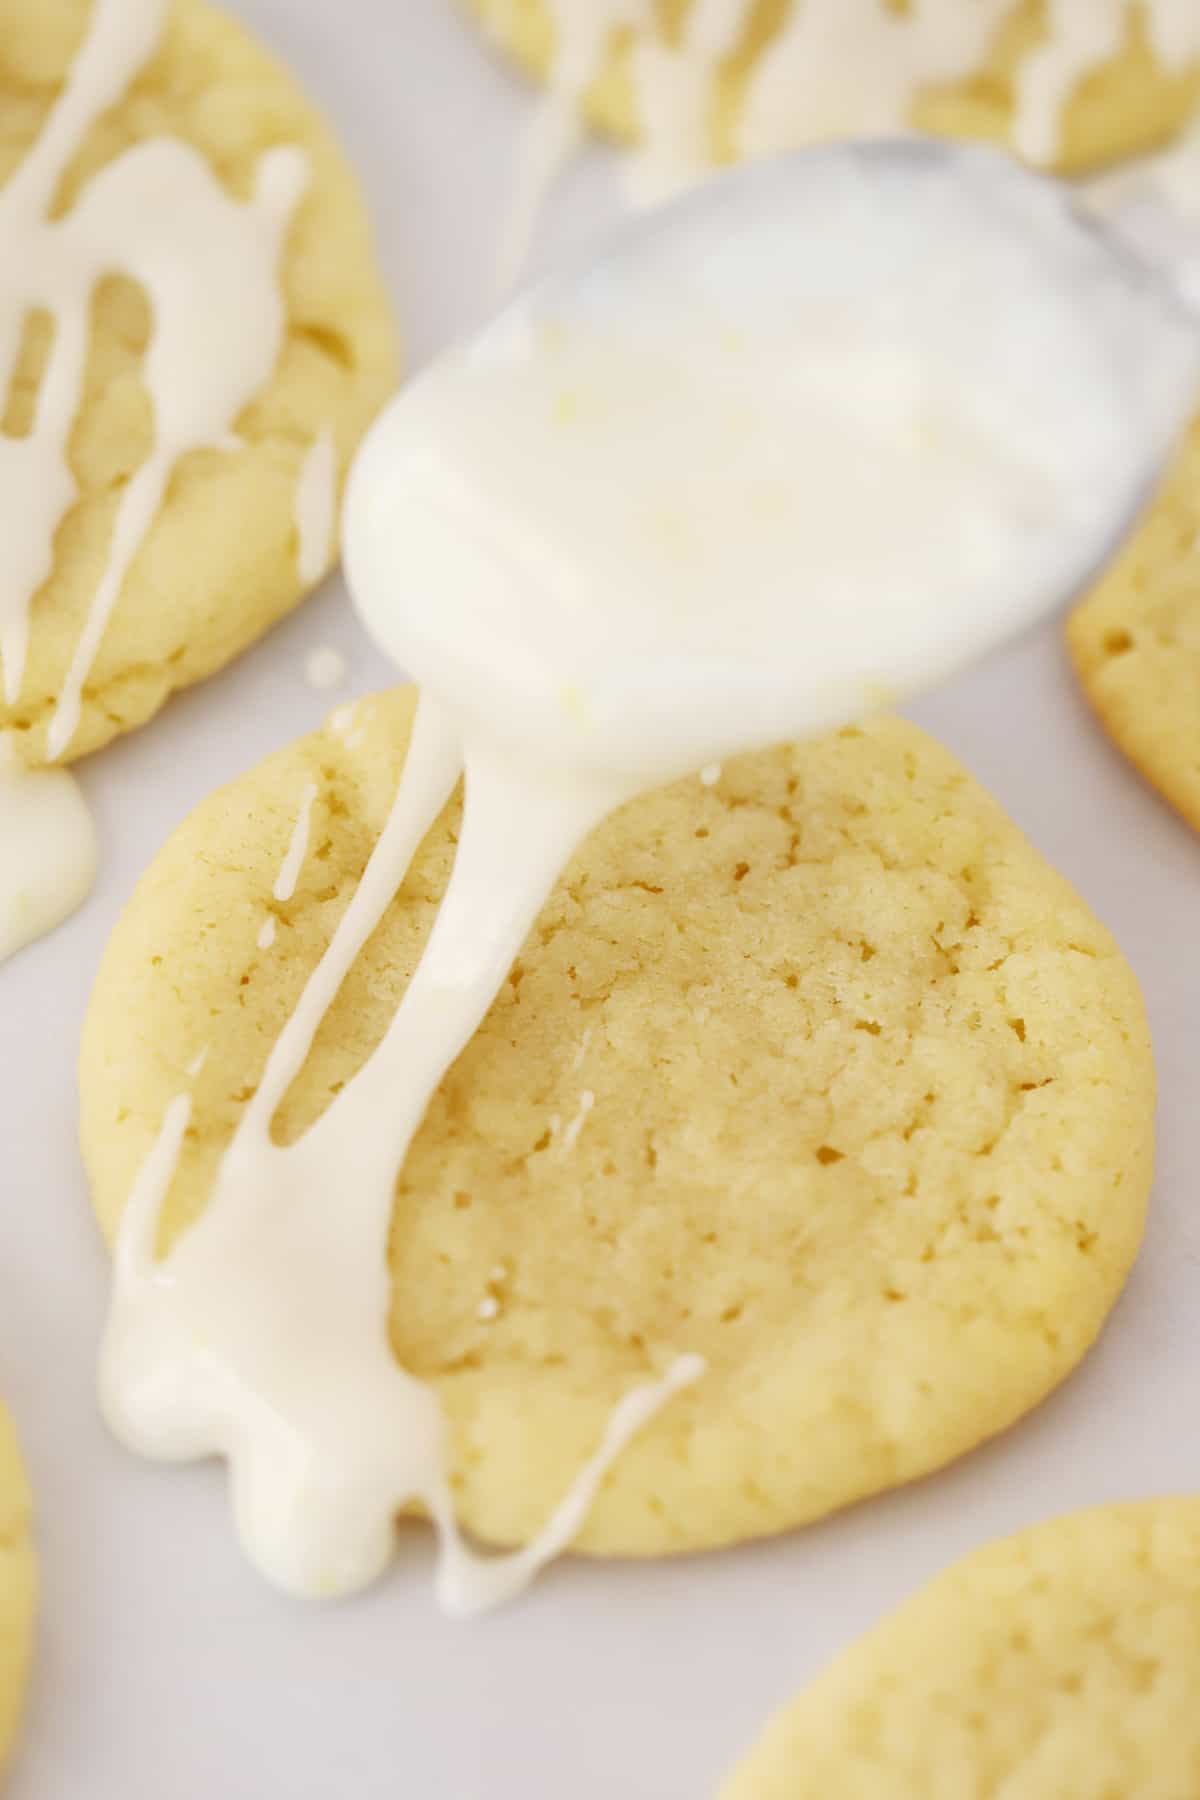 A lemon cookie being drizzled with glaze.